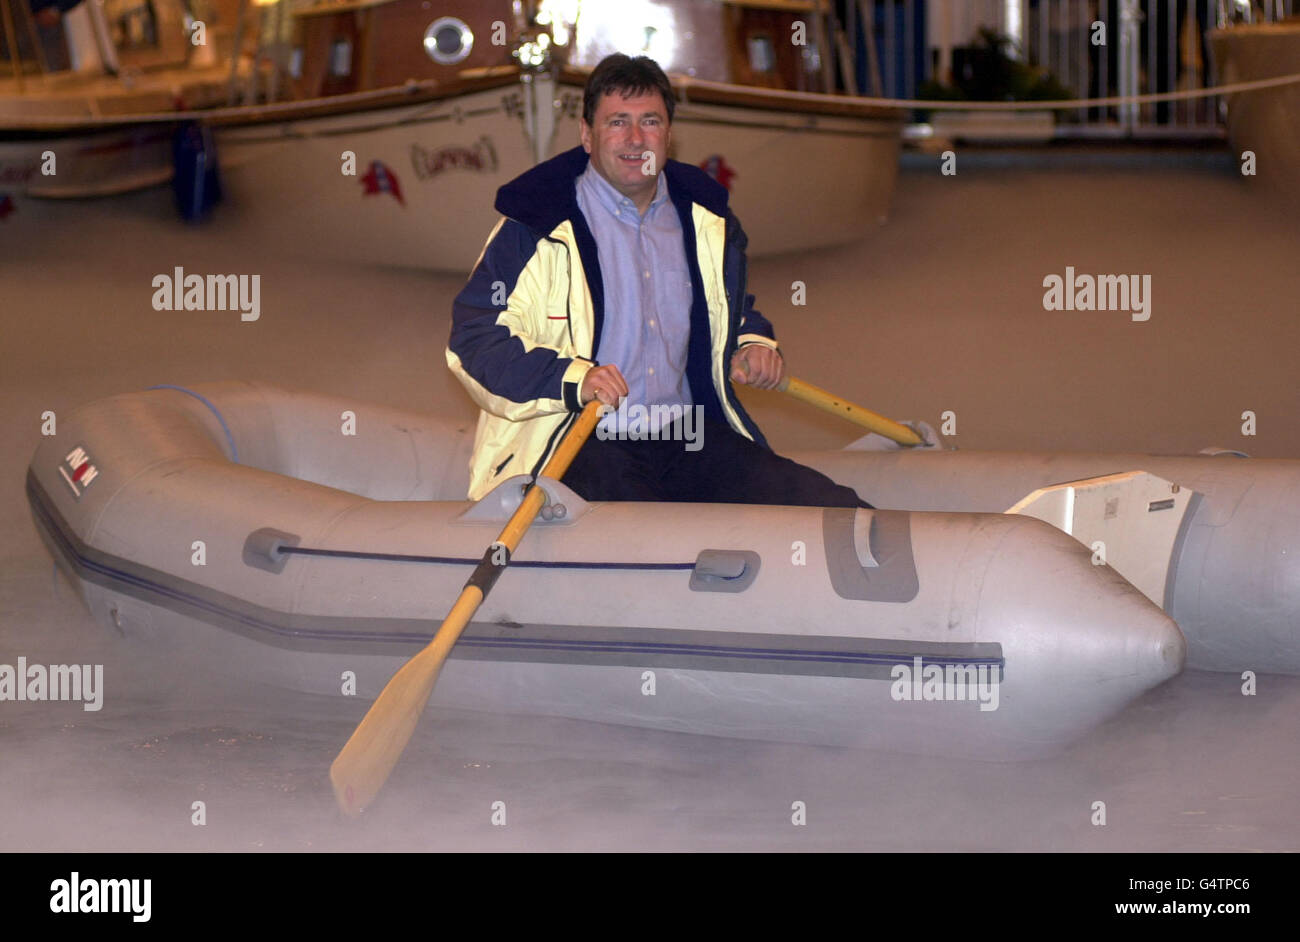 TV gardening expert Alan Titchmarsh, after opening the London Boat Show at Earl's Court. Some of the world s most desirable boats are on display at the 46th London Boat Show, where an estimated 170,000 visitors are expected to view more than 1,000 boats on display. Stock Photo